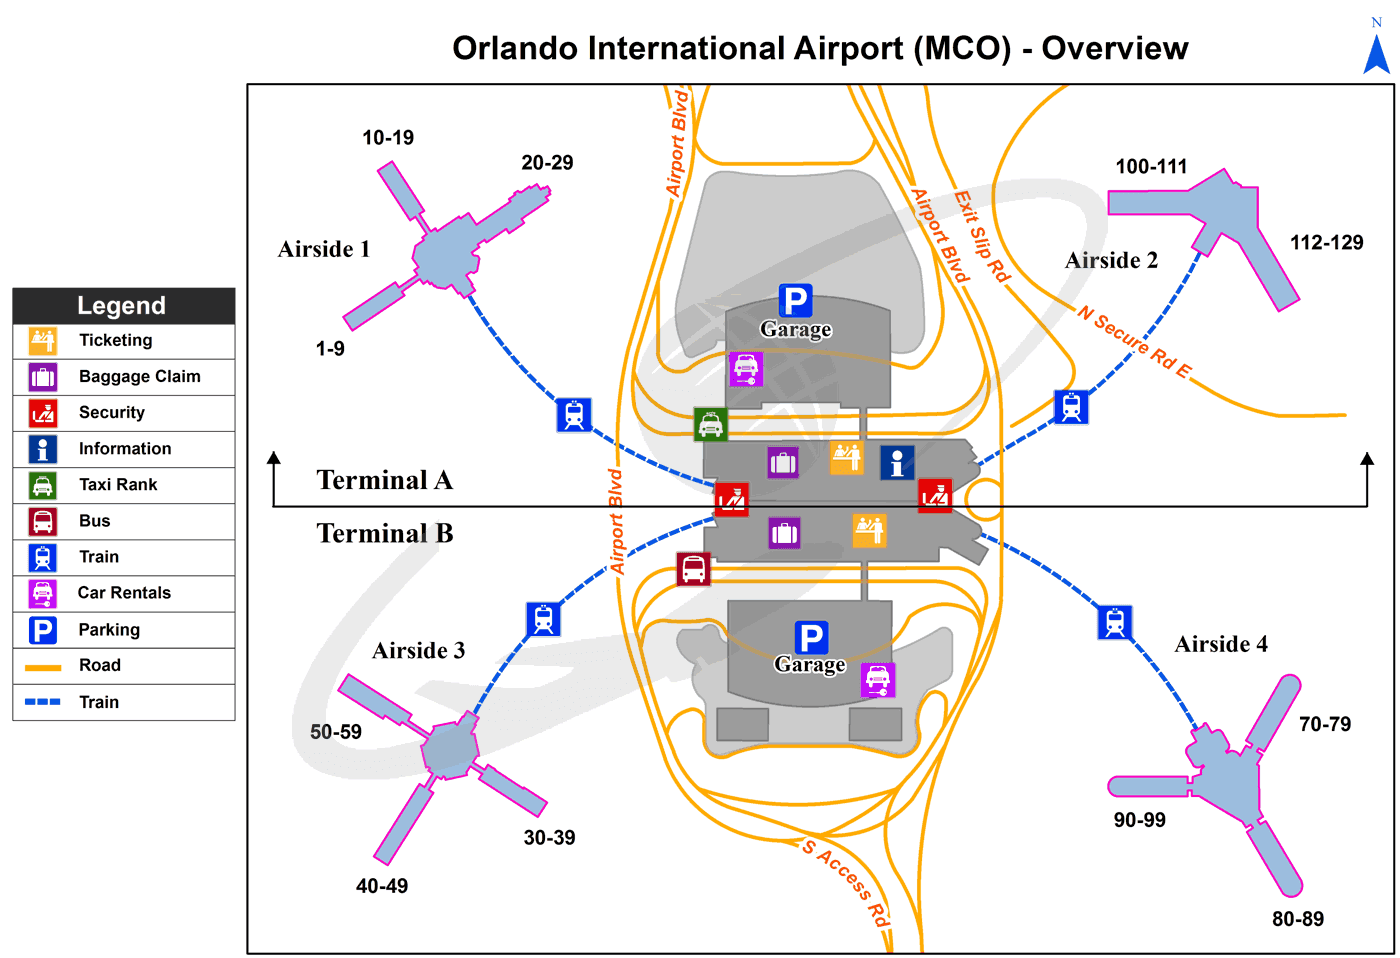 MCO_overview_map